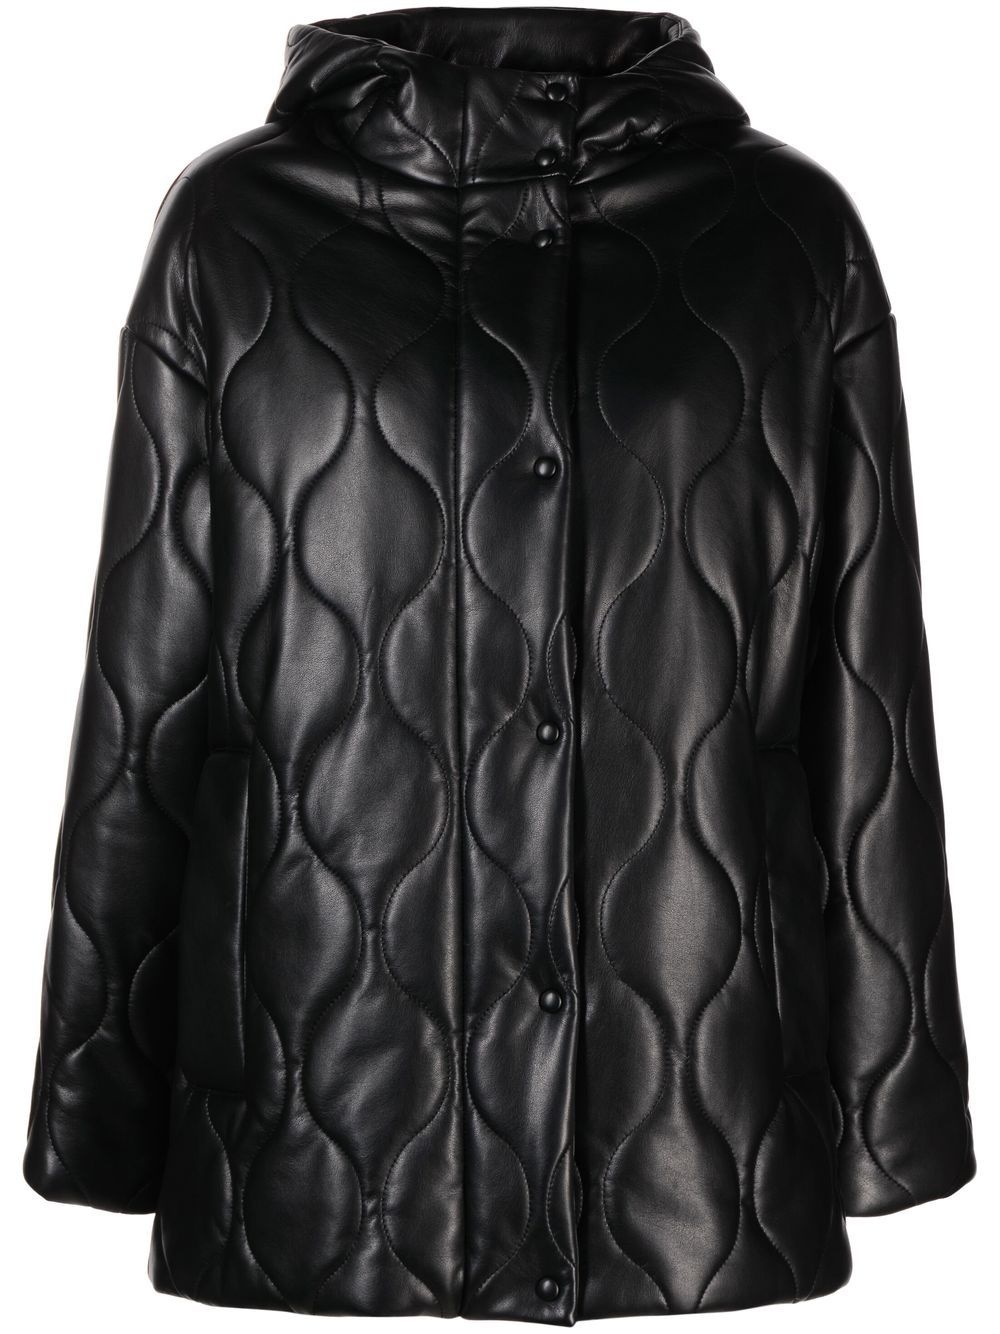 Everlee quilted faux-leather jacket - 1